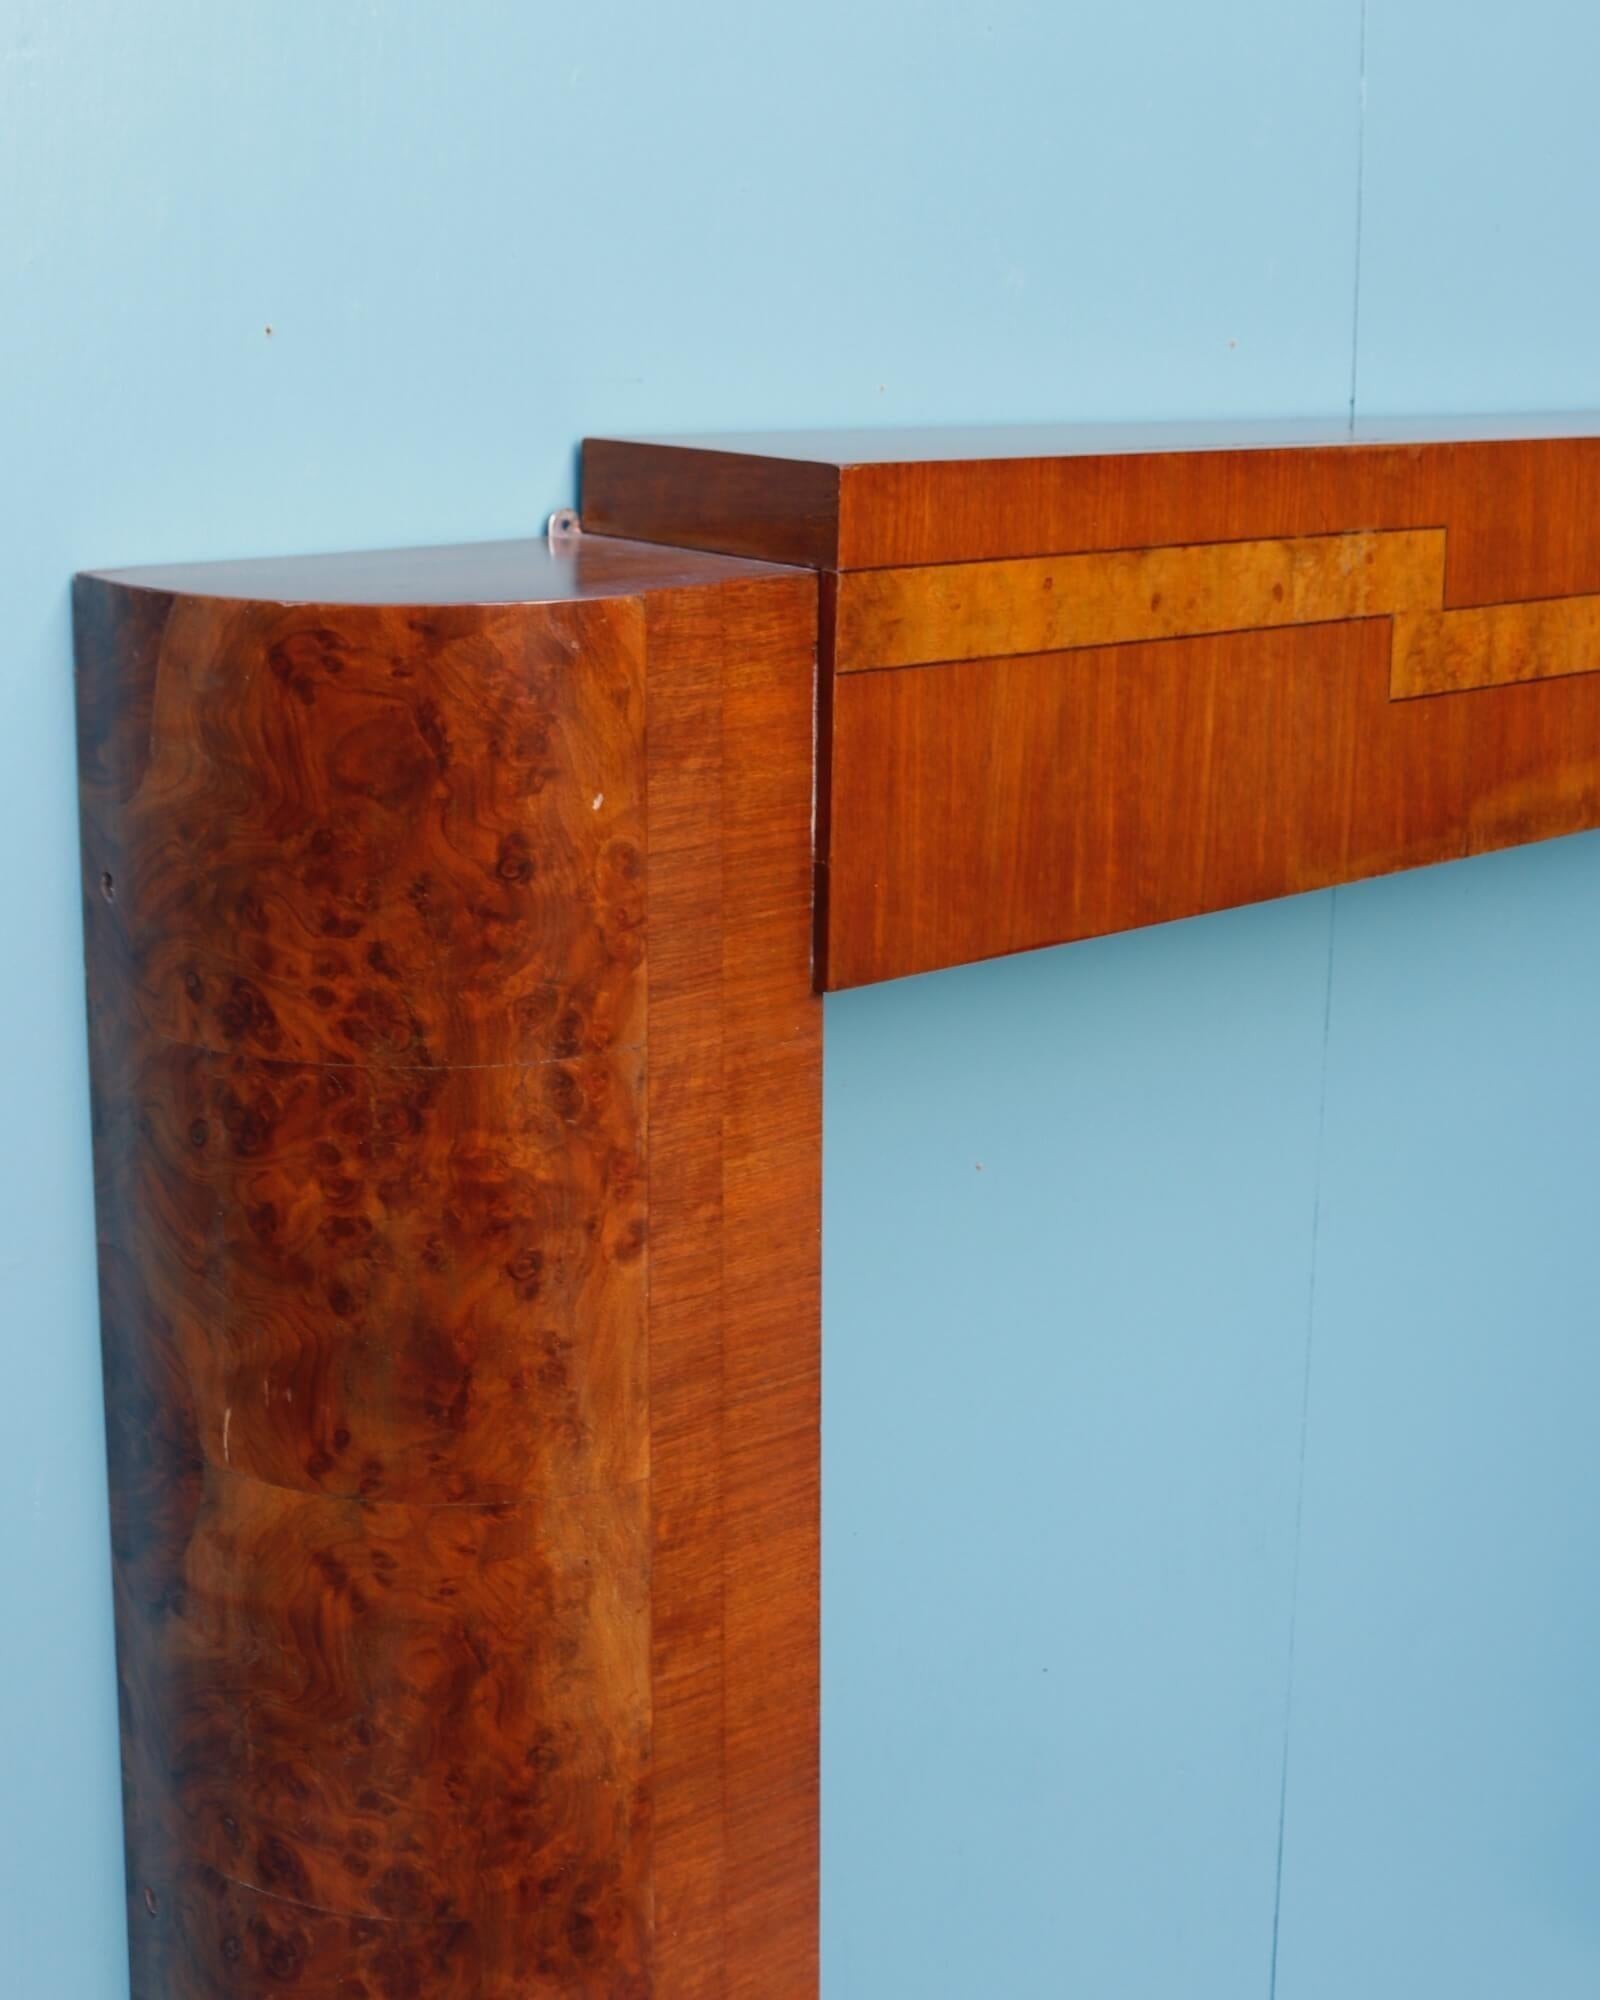 Art Deco Walnut Veneer Fire Mantel In Fair Condition For Sale In Wormelow, Herefordshire